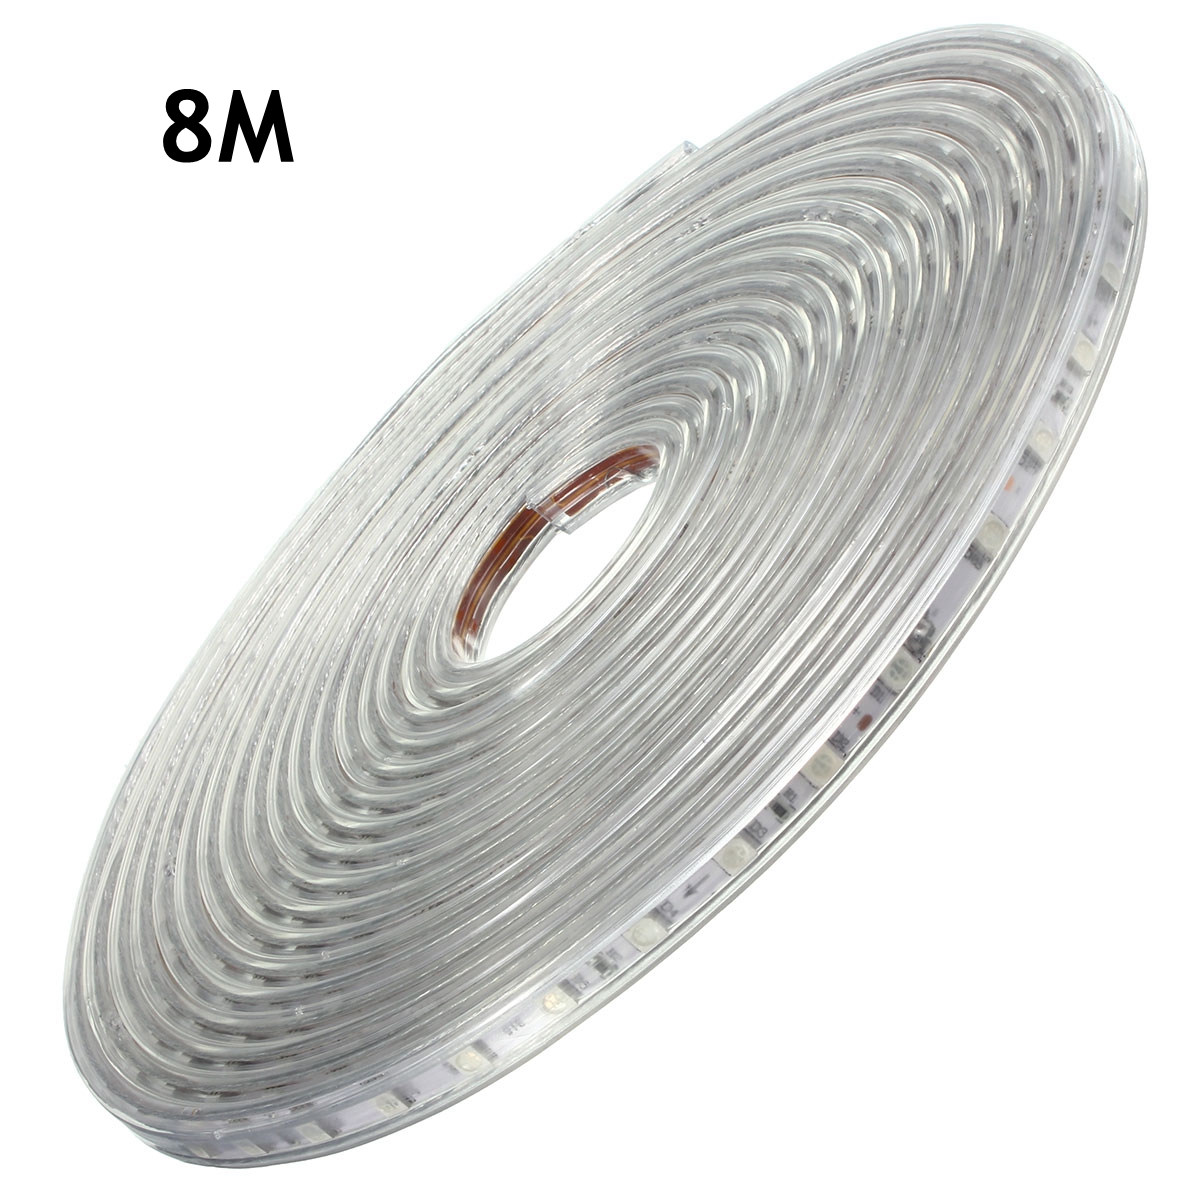 8M-5050-LED-SMD-Outdoor-Waterproof-Flexible-Tape-Rope-Strip-Light-Xmas-220V-1066360-2